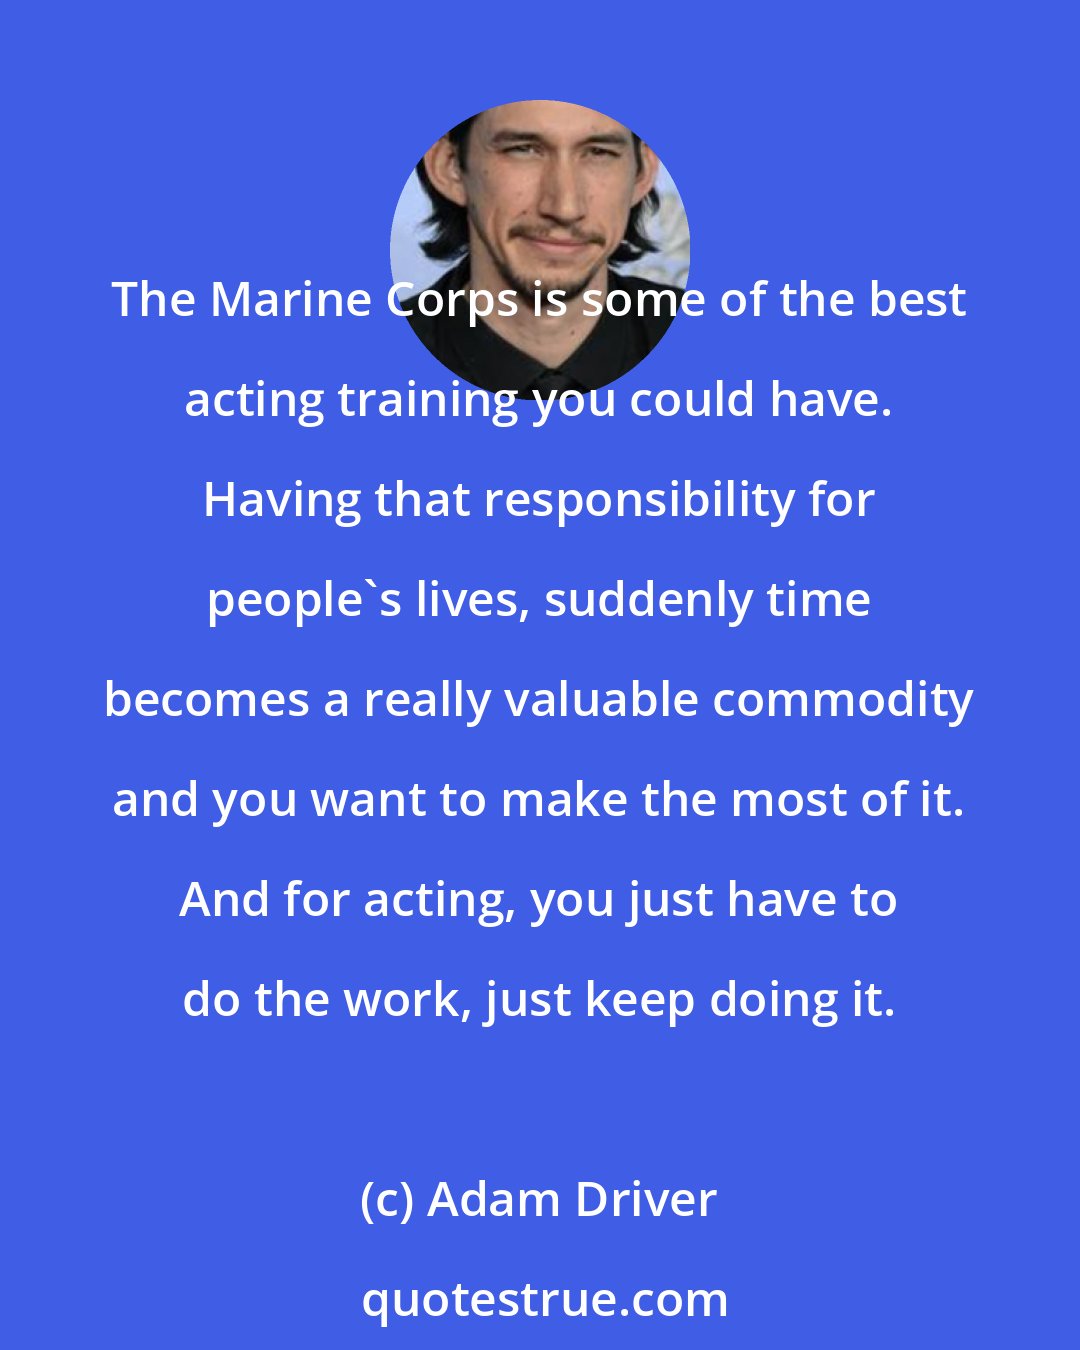 Adam Driver: The Marine Corps is some of the best acting training you could have. Having that responsibility for people's lives, suddenly time becomes a really valuable commodity and you want to make the most of it. And for acting, you just have to do the work, just keep doing it.